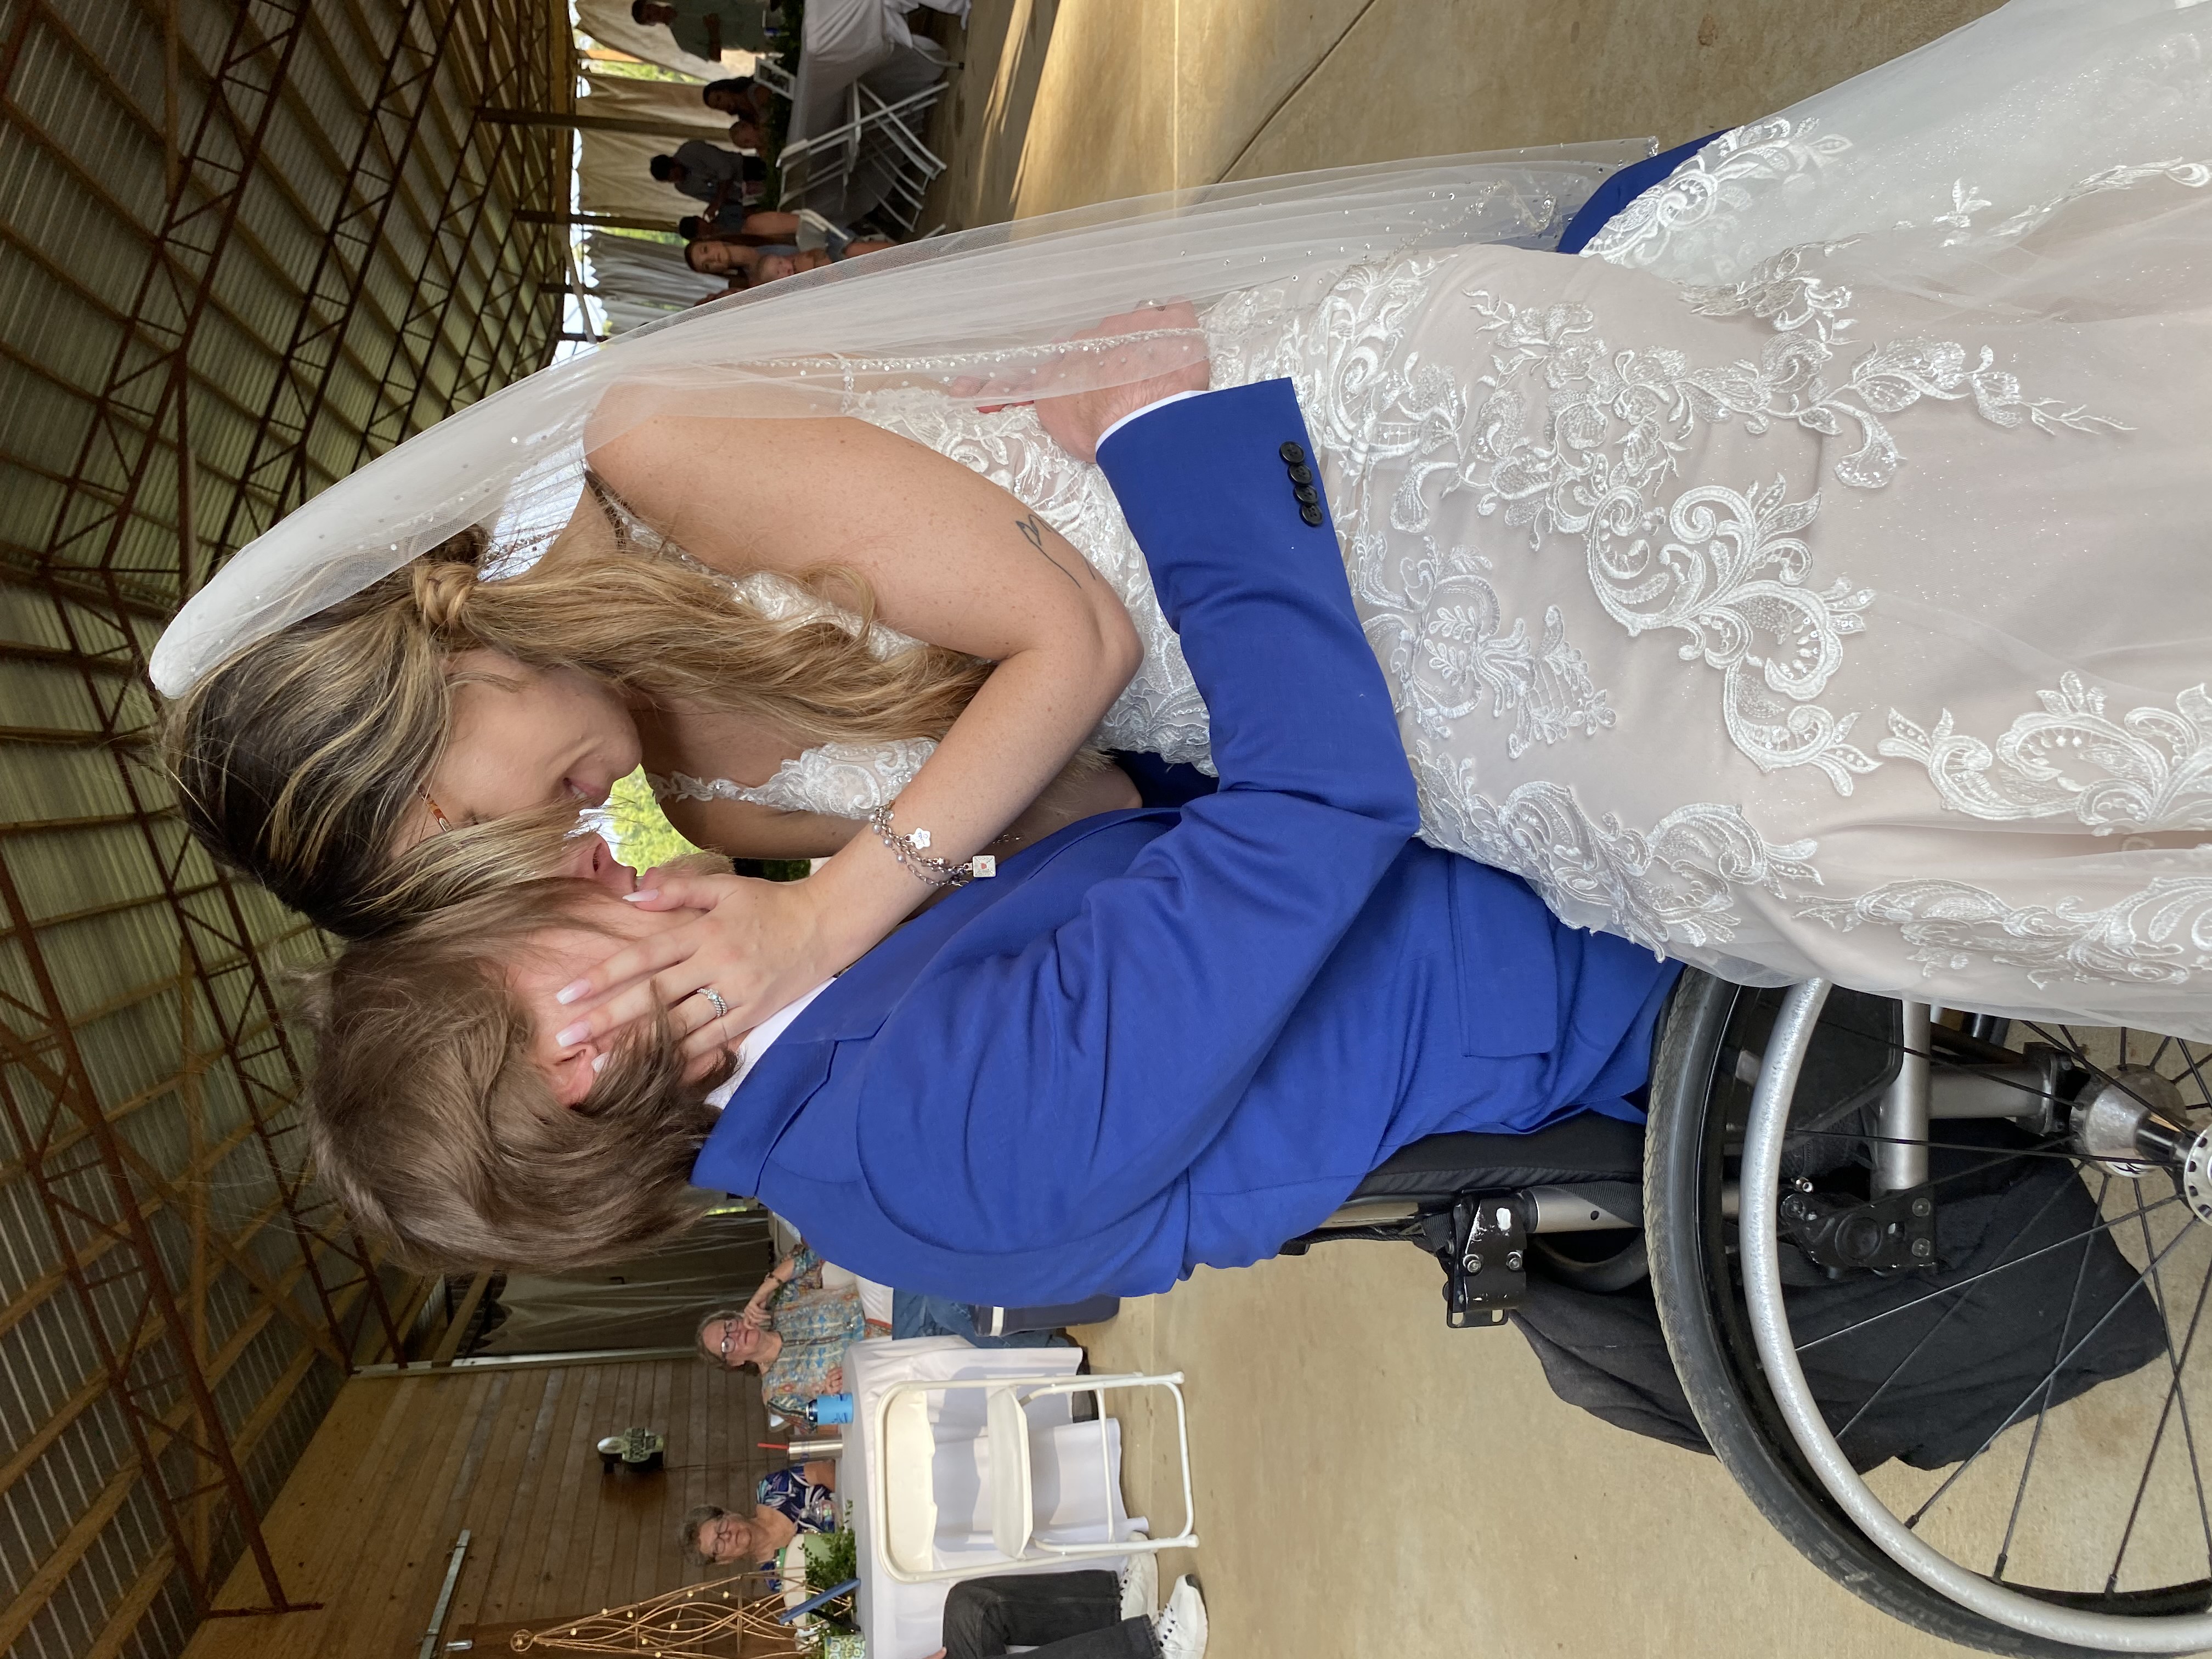 Video: Paralyzed Groom Surprises Bride by Standing and Embracing Her for First  Dance